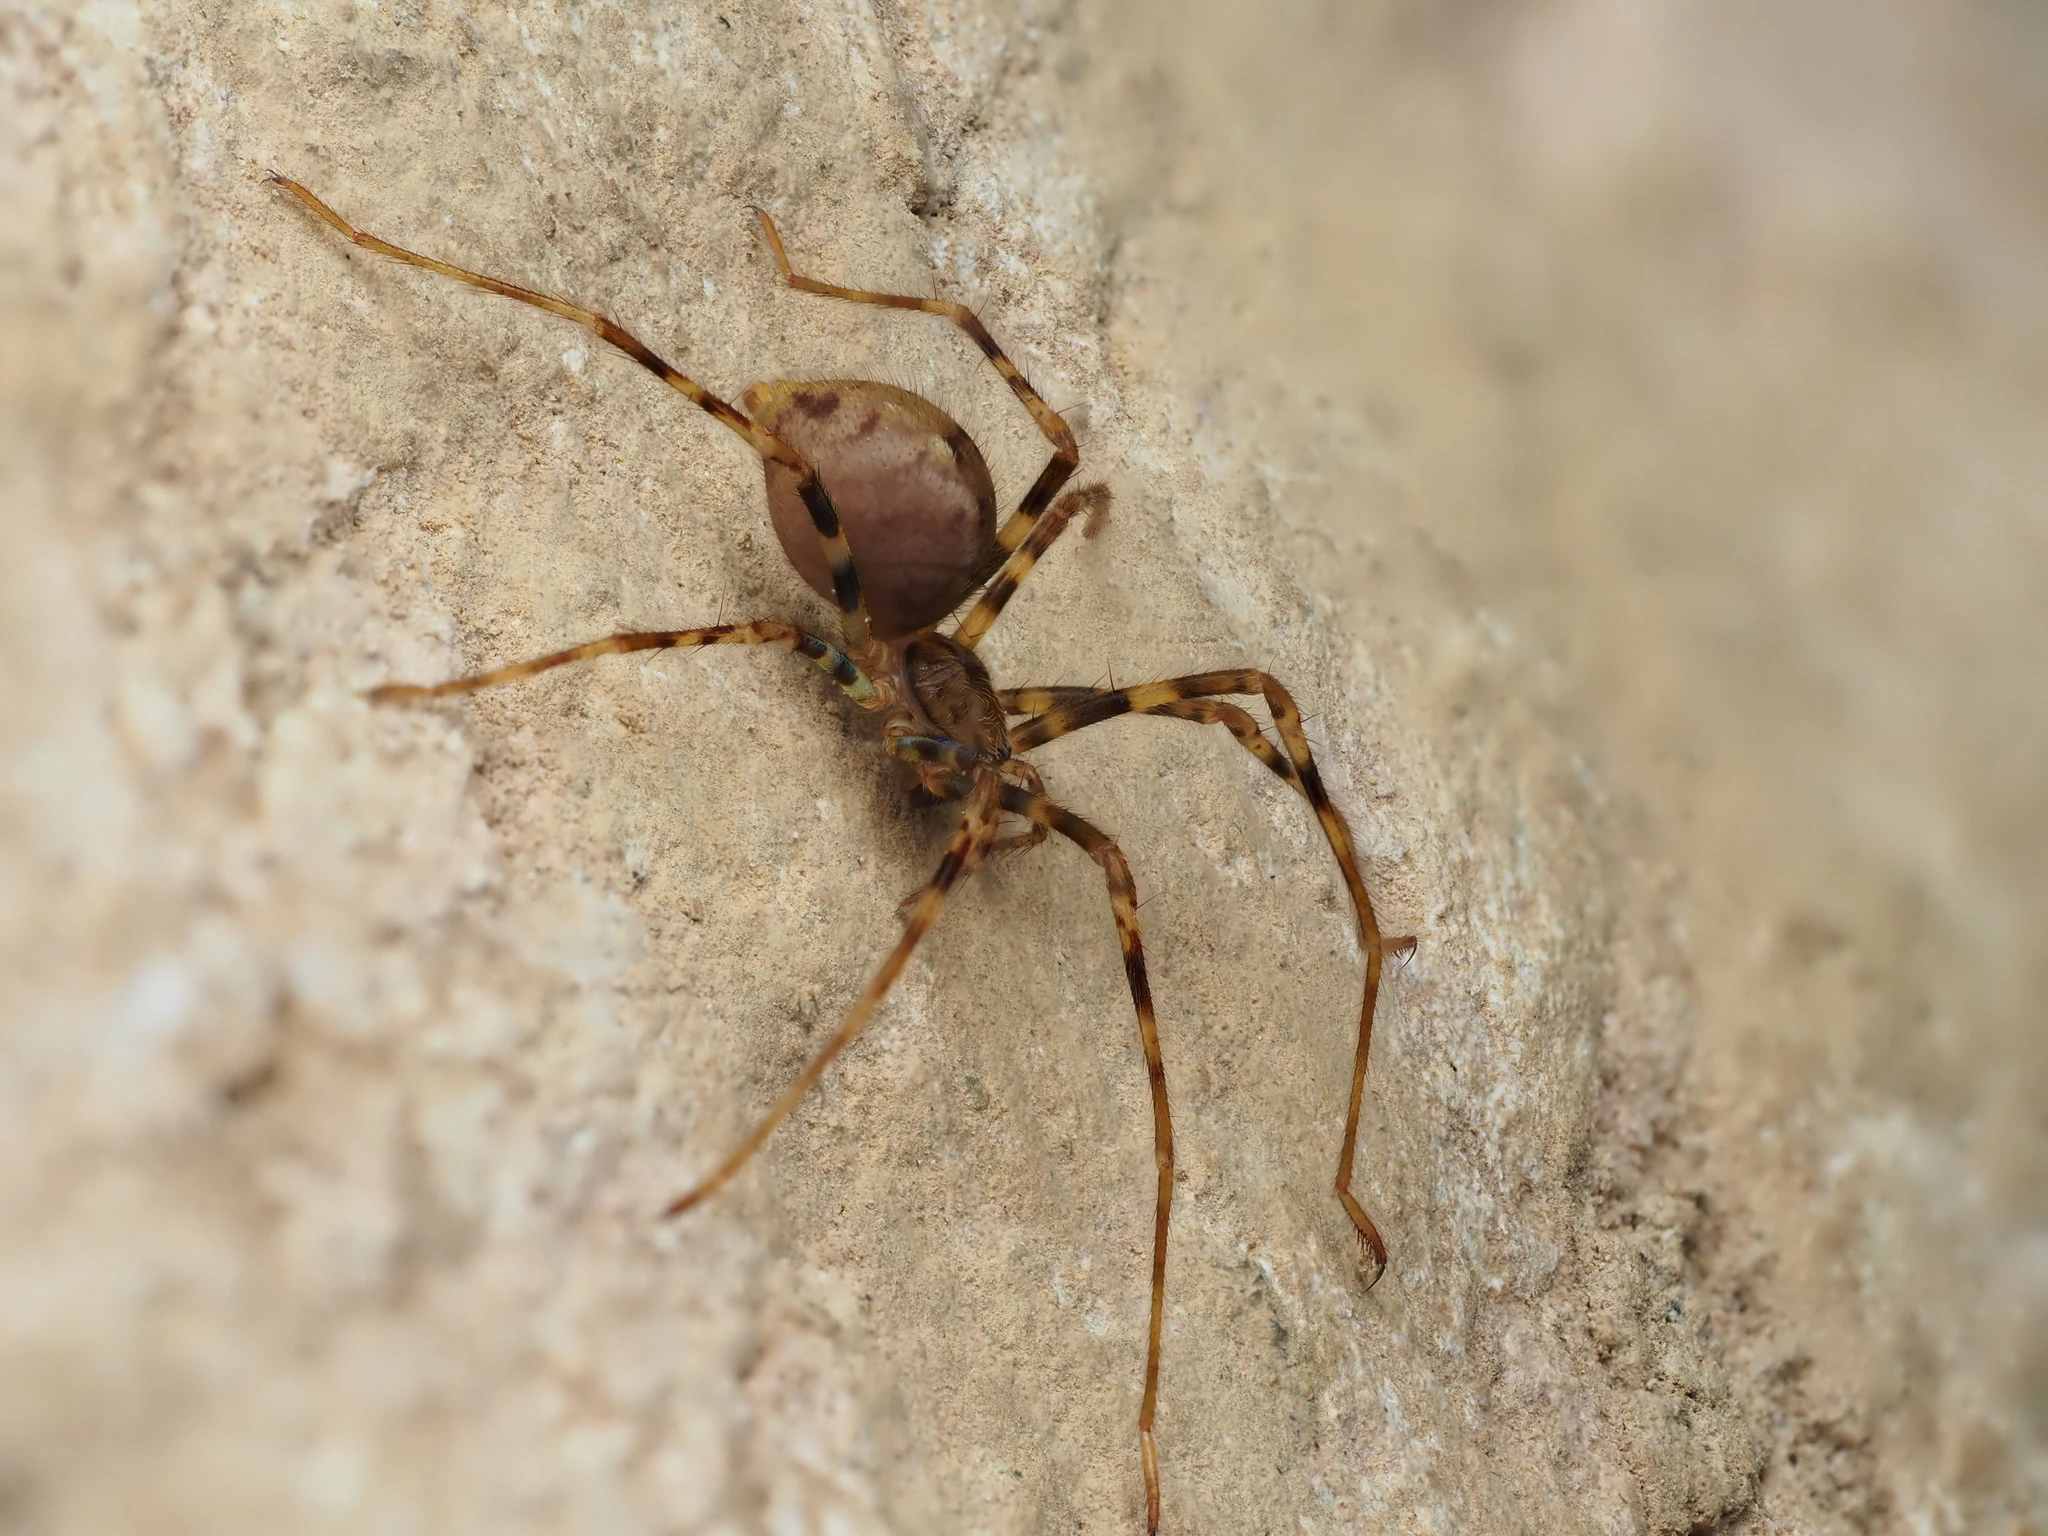 A long-legged spider on a rock.